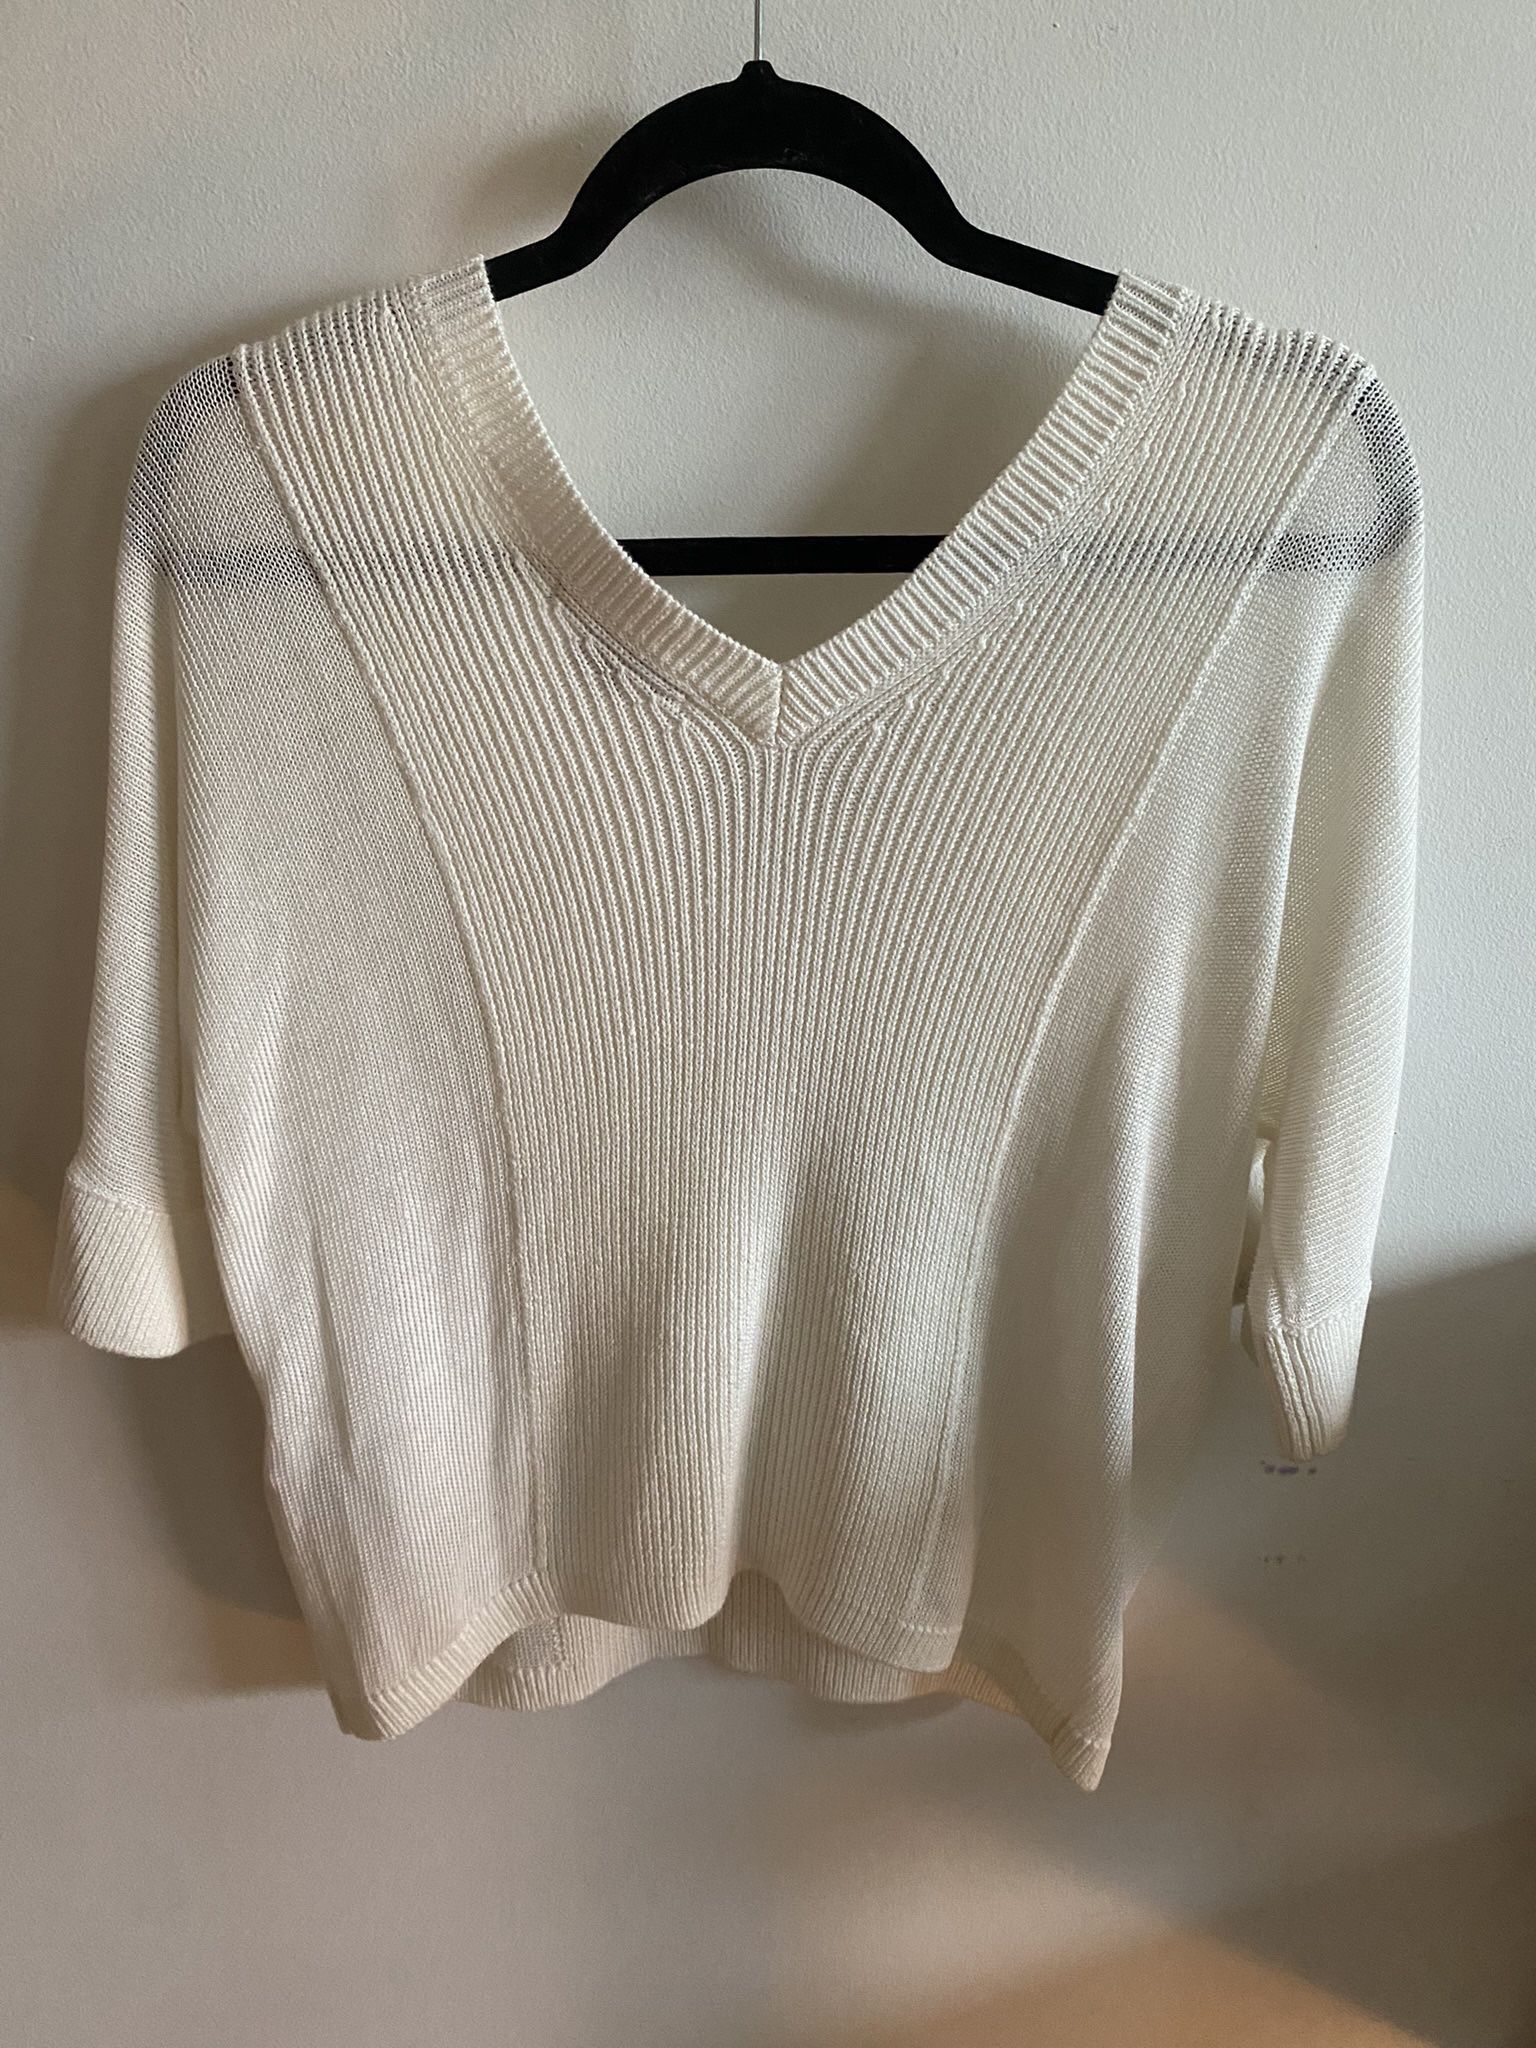 Armani exchange 3/4 Length Top for Sale in Portland, OR - OfferUp